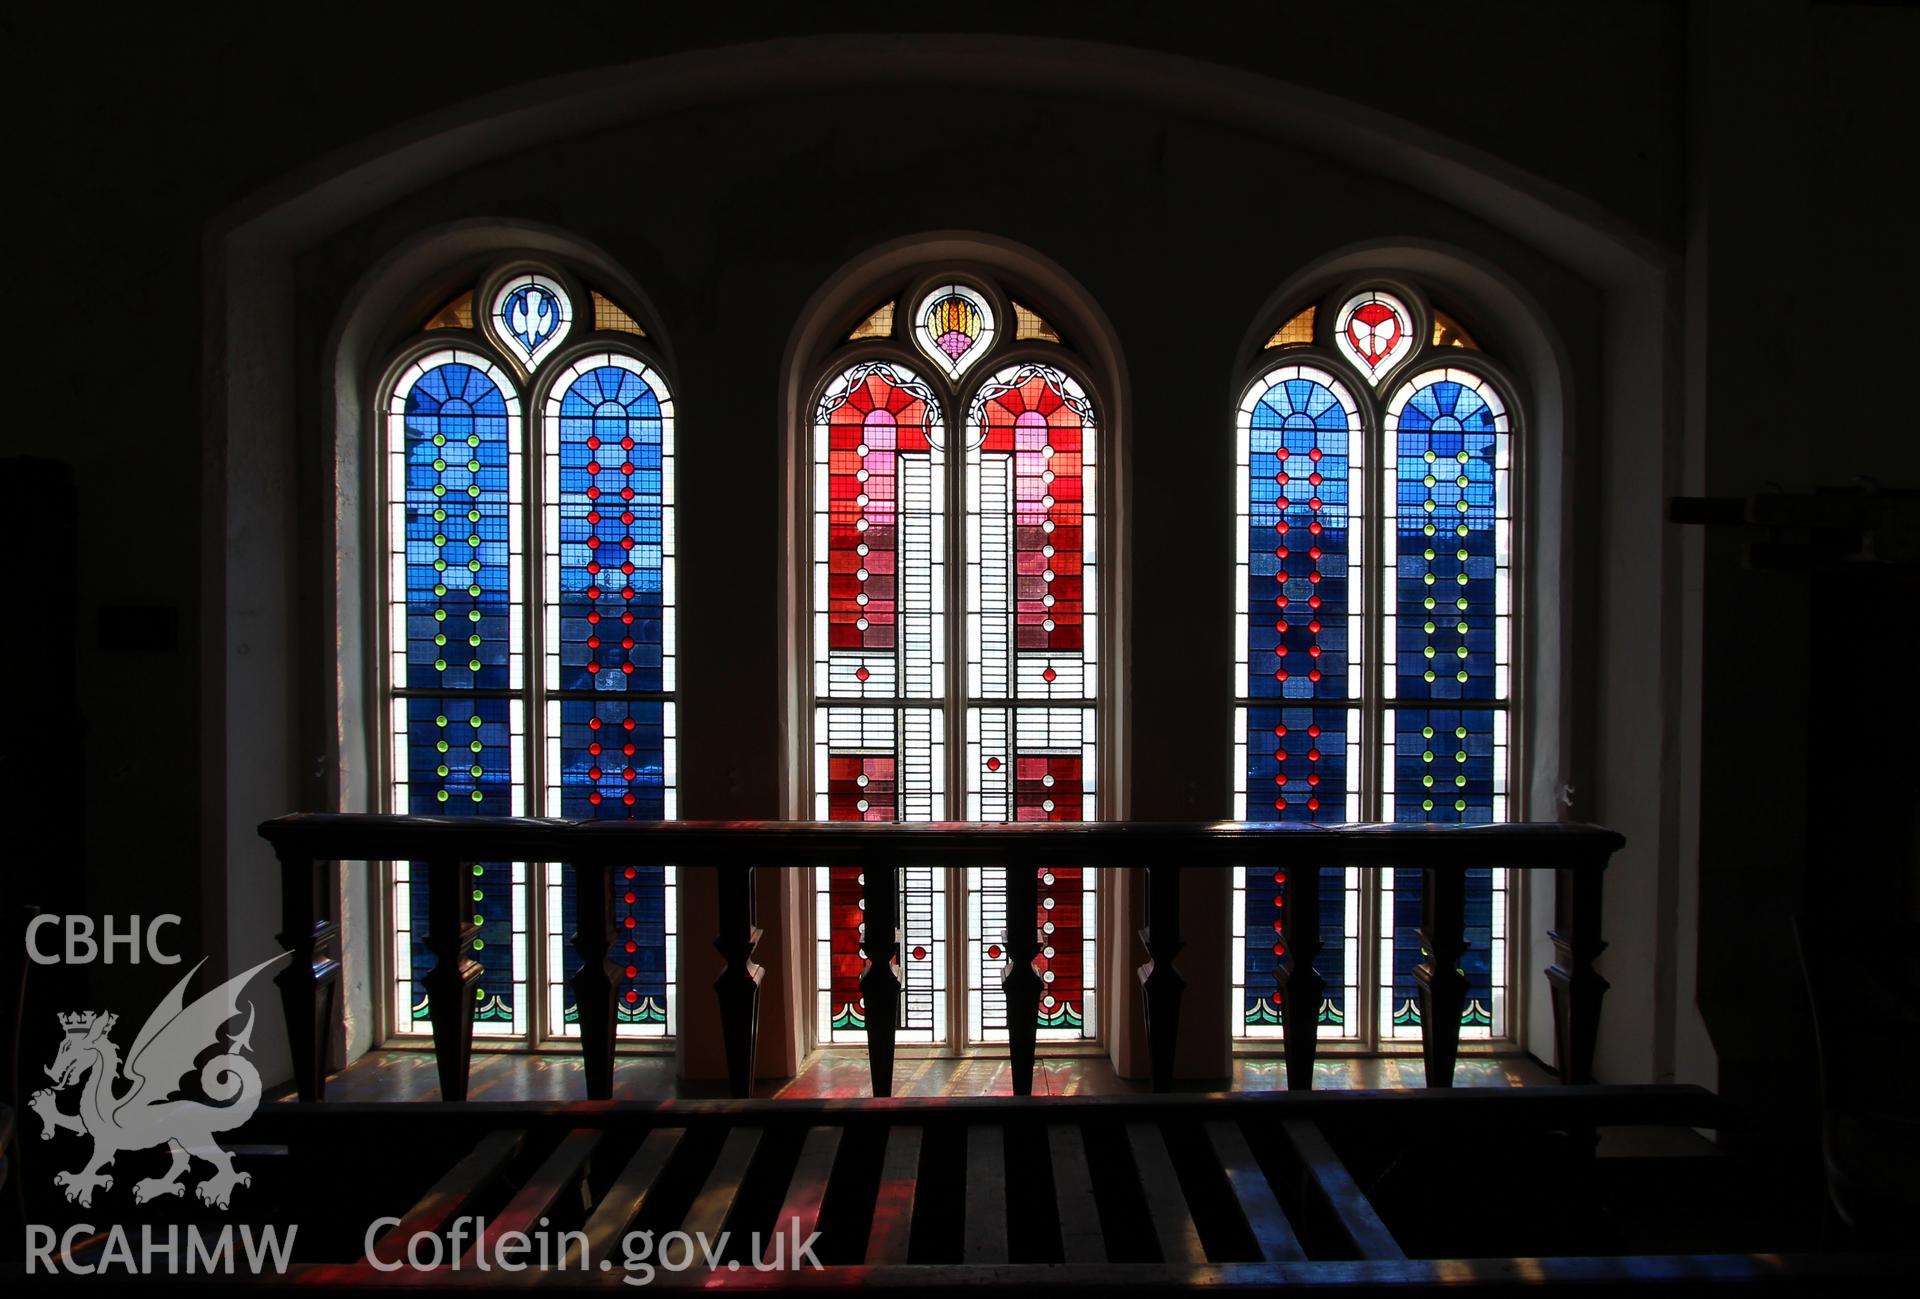 Interior view of stained glass windows. Photographic survey of Seion Welsh Baptist Chapel, Morriston, conducted by Sue Fielding on 13th May 2017.